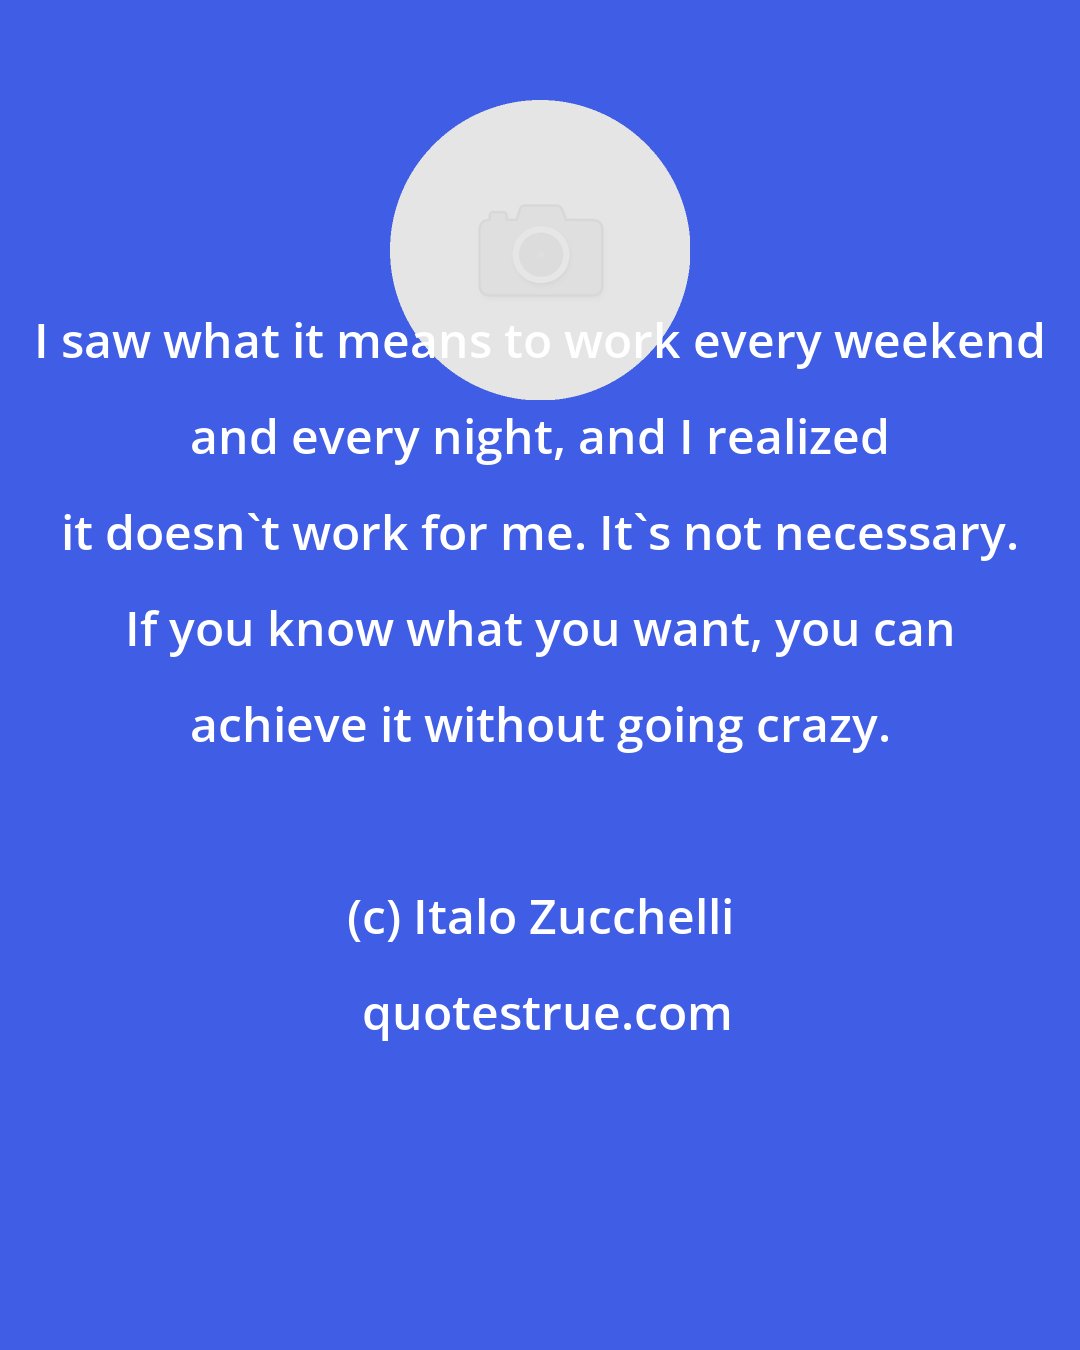 Italo Zucchelli: I saw what it means to work every weekend and every night, and I realized it doesn't work for me. It's not necessary. If you know what you want, you can achieve it without going crazy.